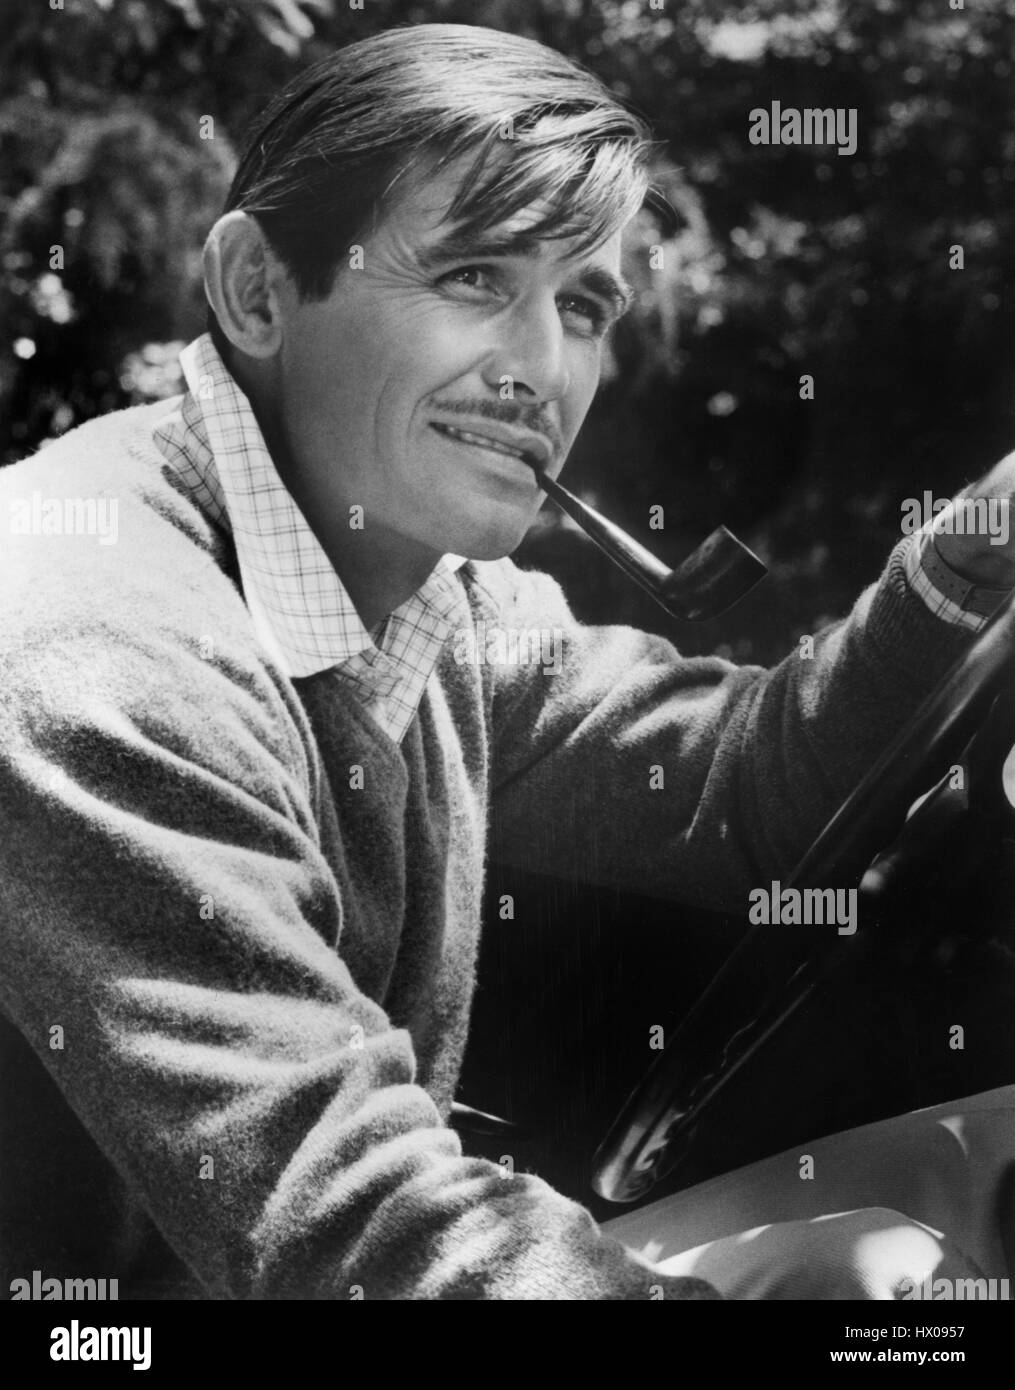 James Brolin, on-set of the Film, 'Gable and Lombard', 1976 Stock Photo